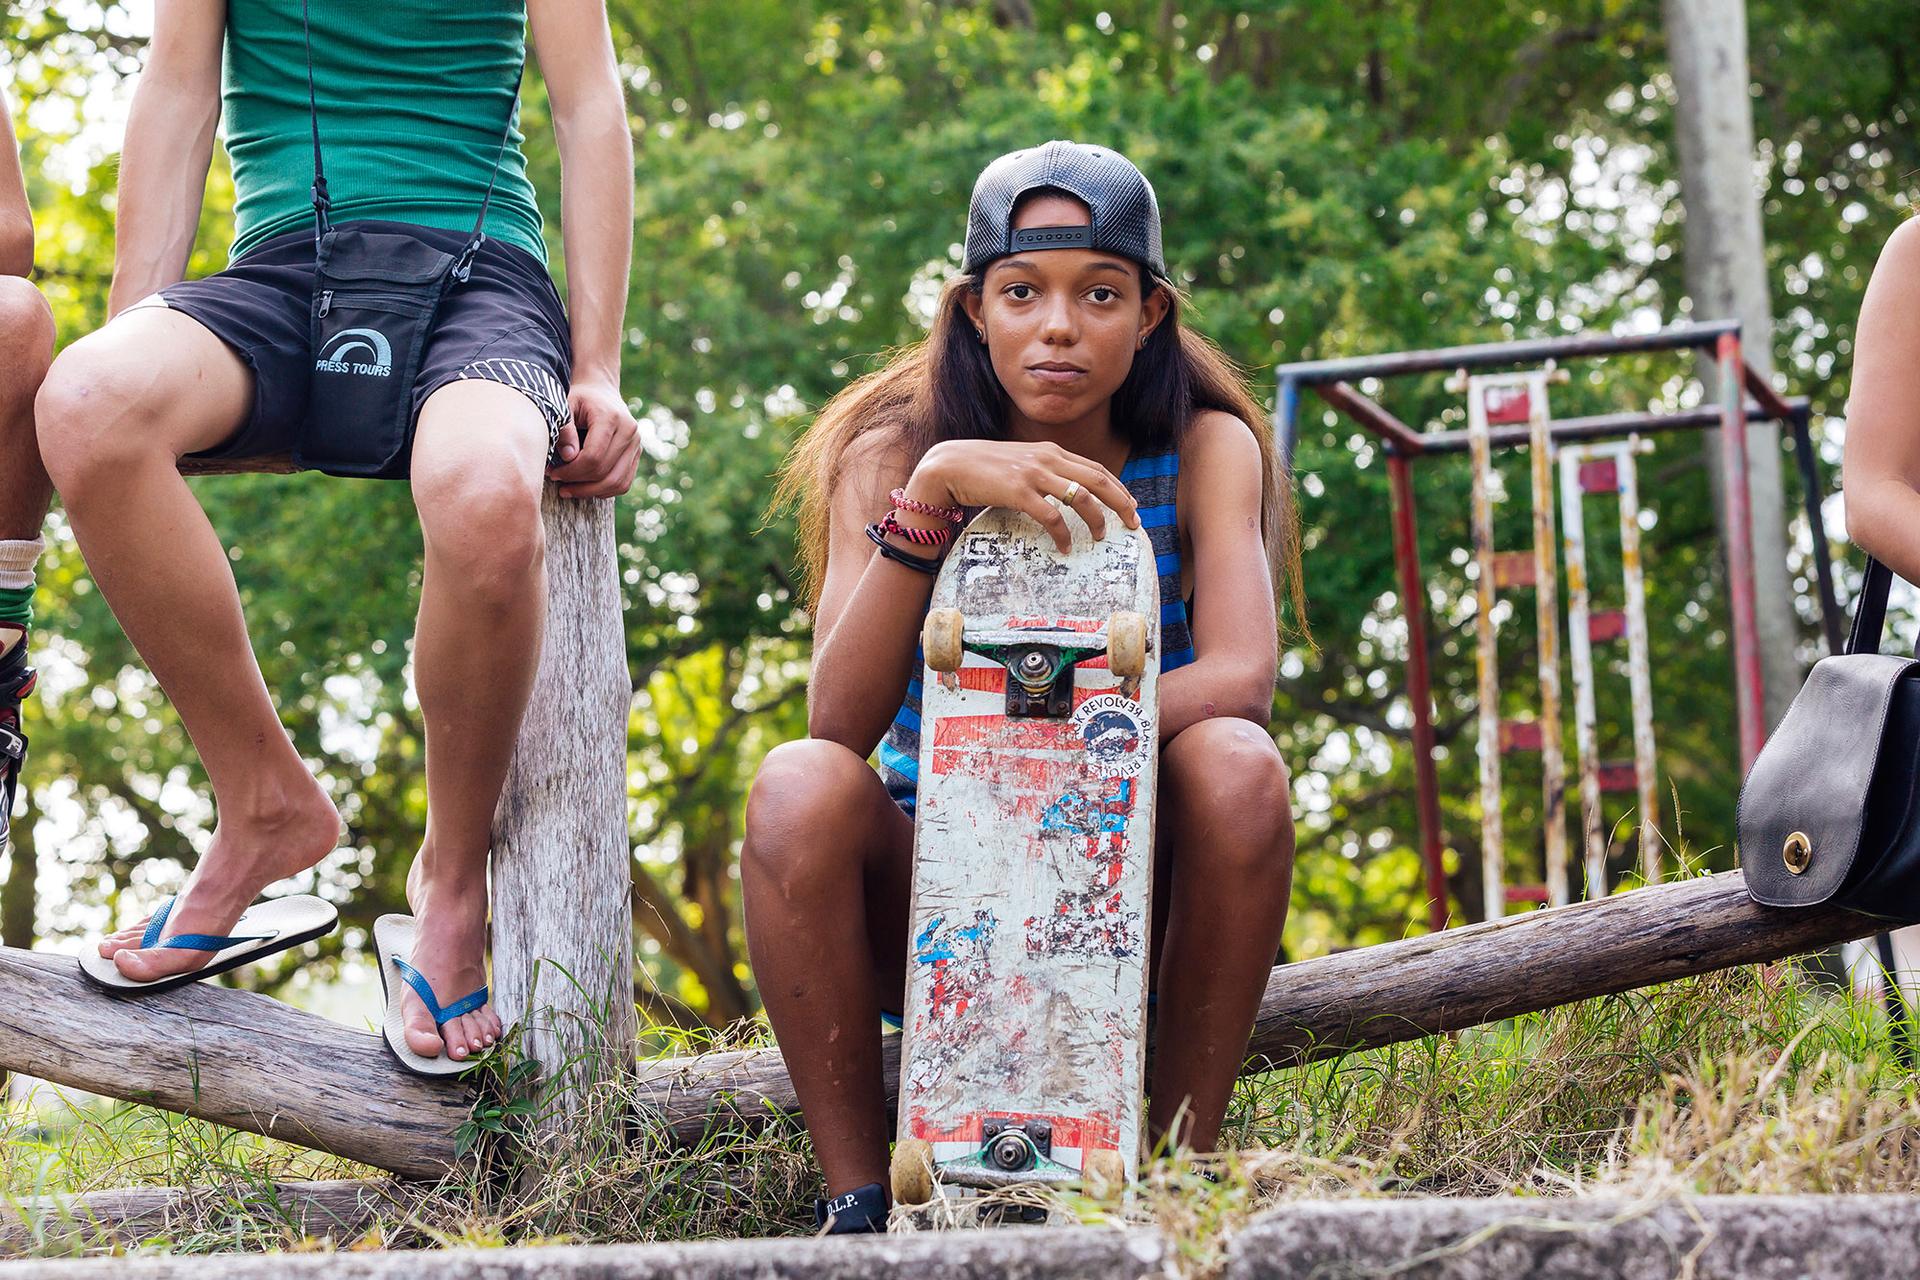 Daria Martinez, a 15-year-old from Vedado, is another regular in the skate scene.